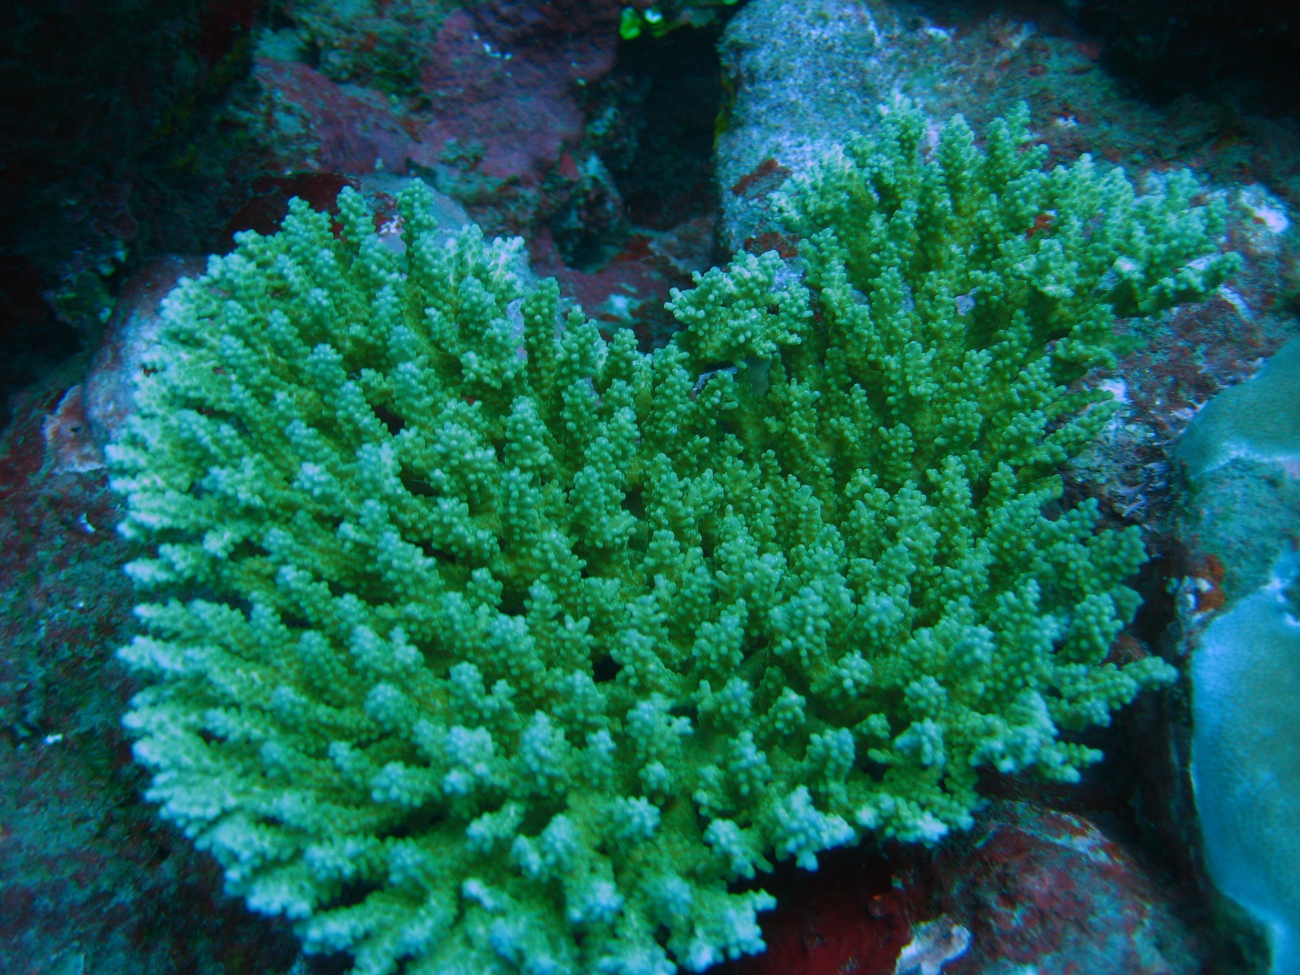 Reef scene with coral colony (Acropora sp